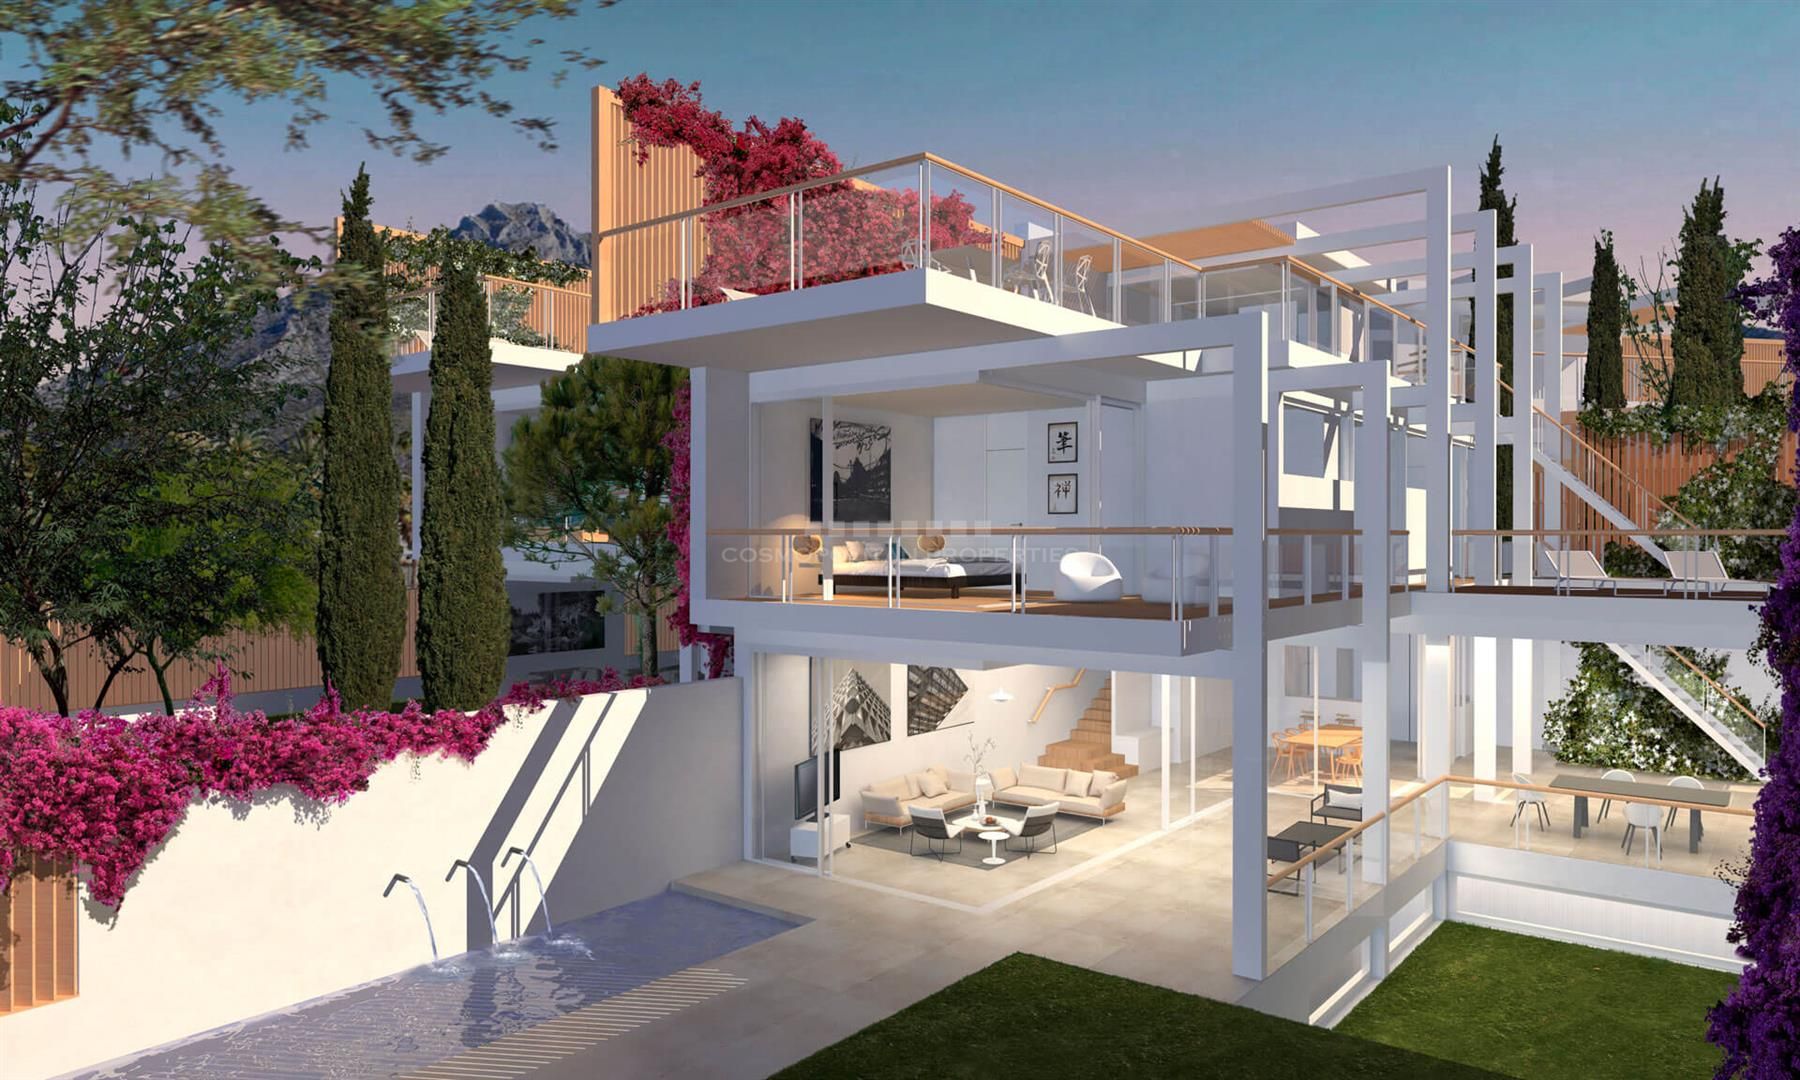 Welcome to Jazmines 14, a set of 8 independent villas in Marbella with an innovative design.